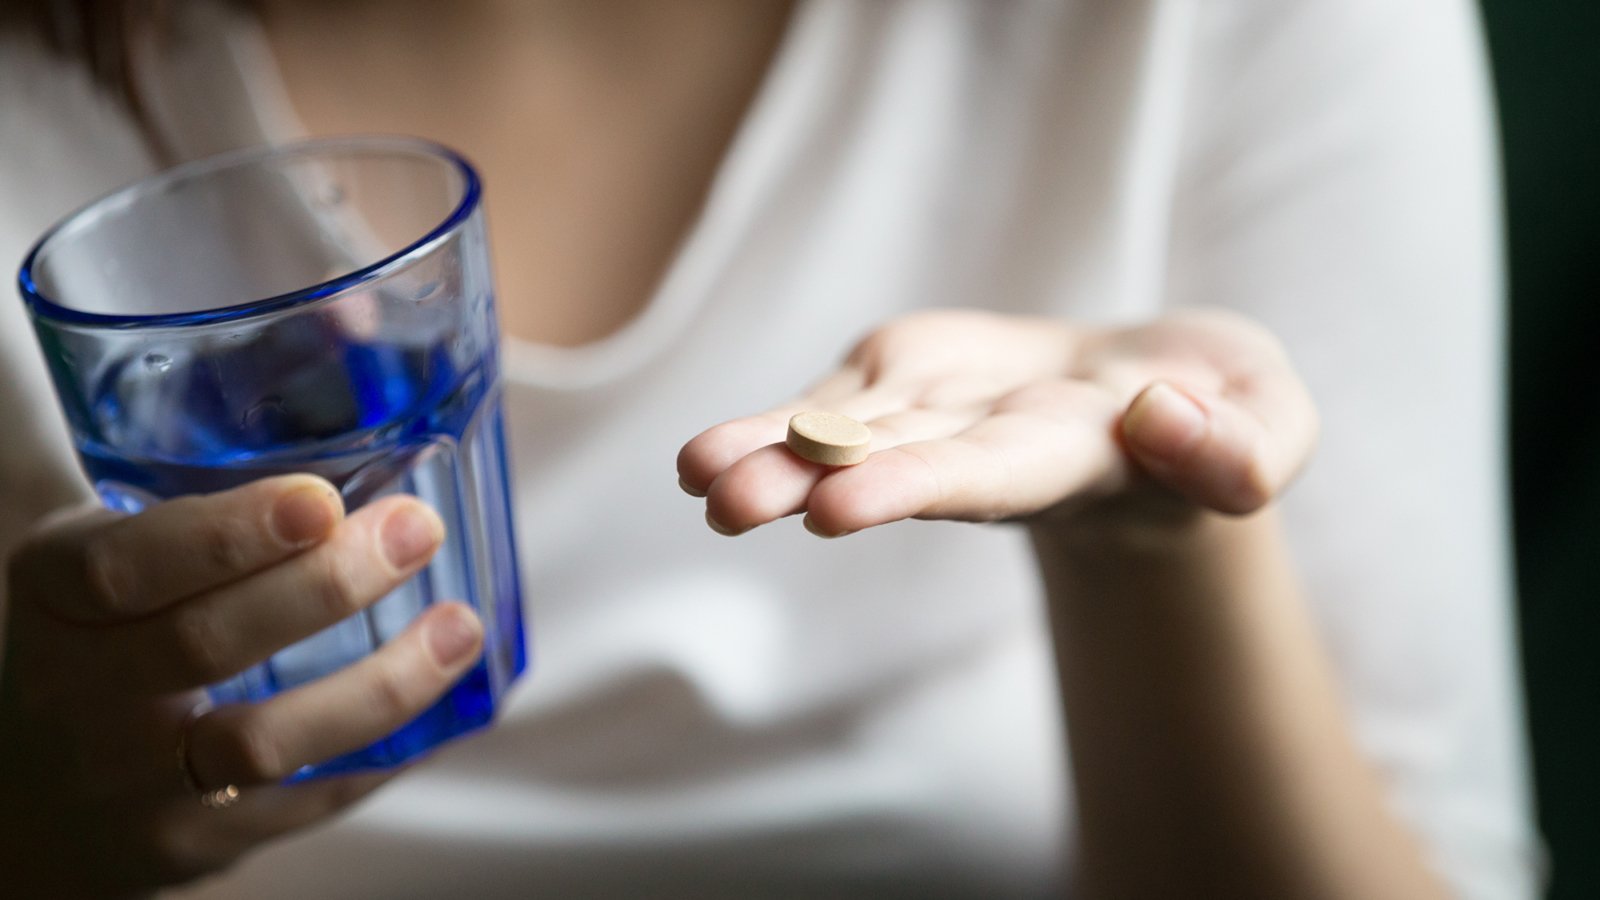 Female hands holding pill and glass of water, woman taking supplements or antibiotic antidepressant painkiller medication to relieve pain headache, contraception side effects concept, close up view